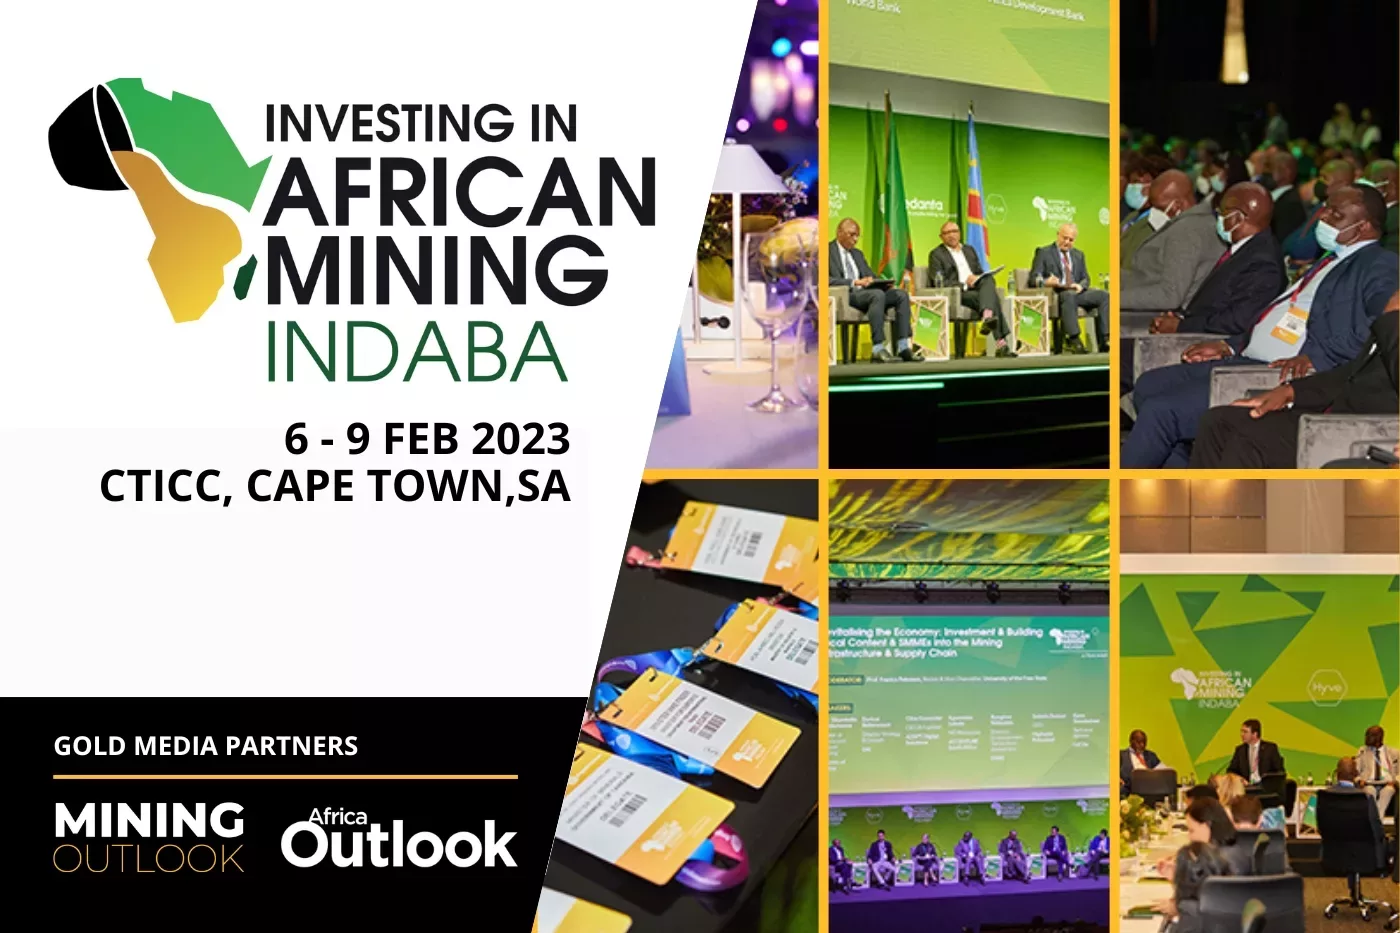 President Cyril Ramaphosa: Investing in African Mining Indaba | South African Government